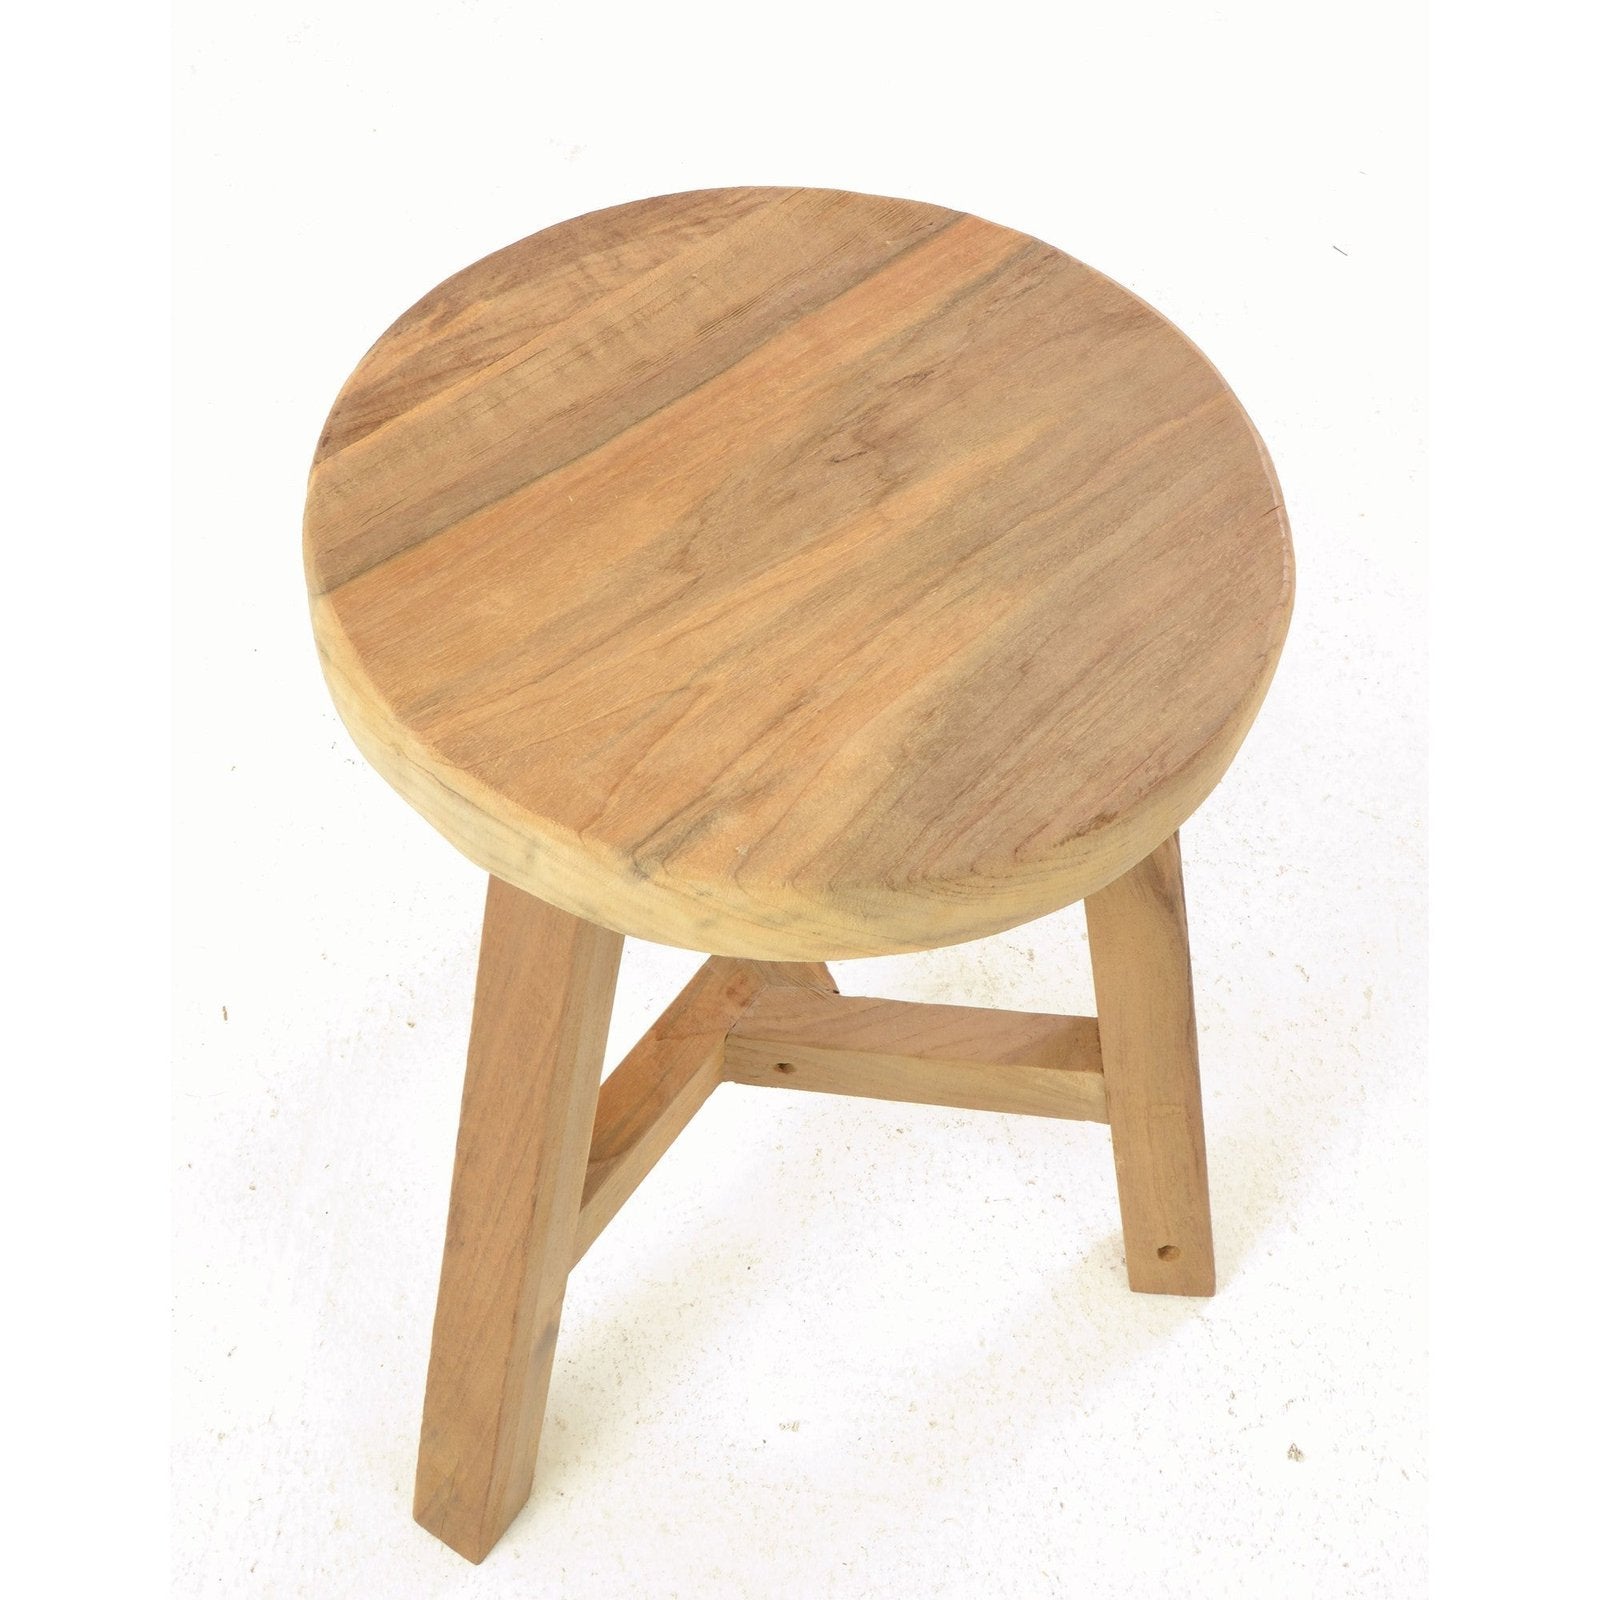 Rustic Country Round Stool